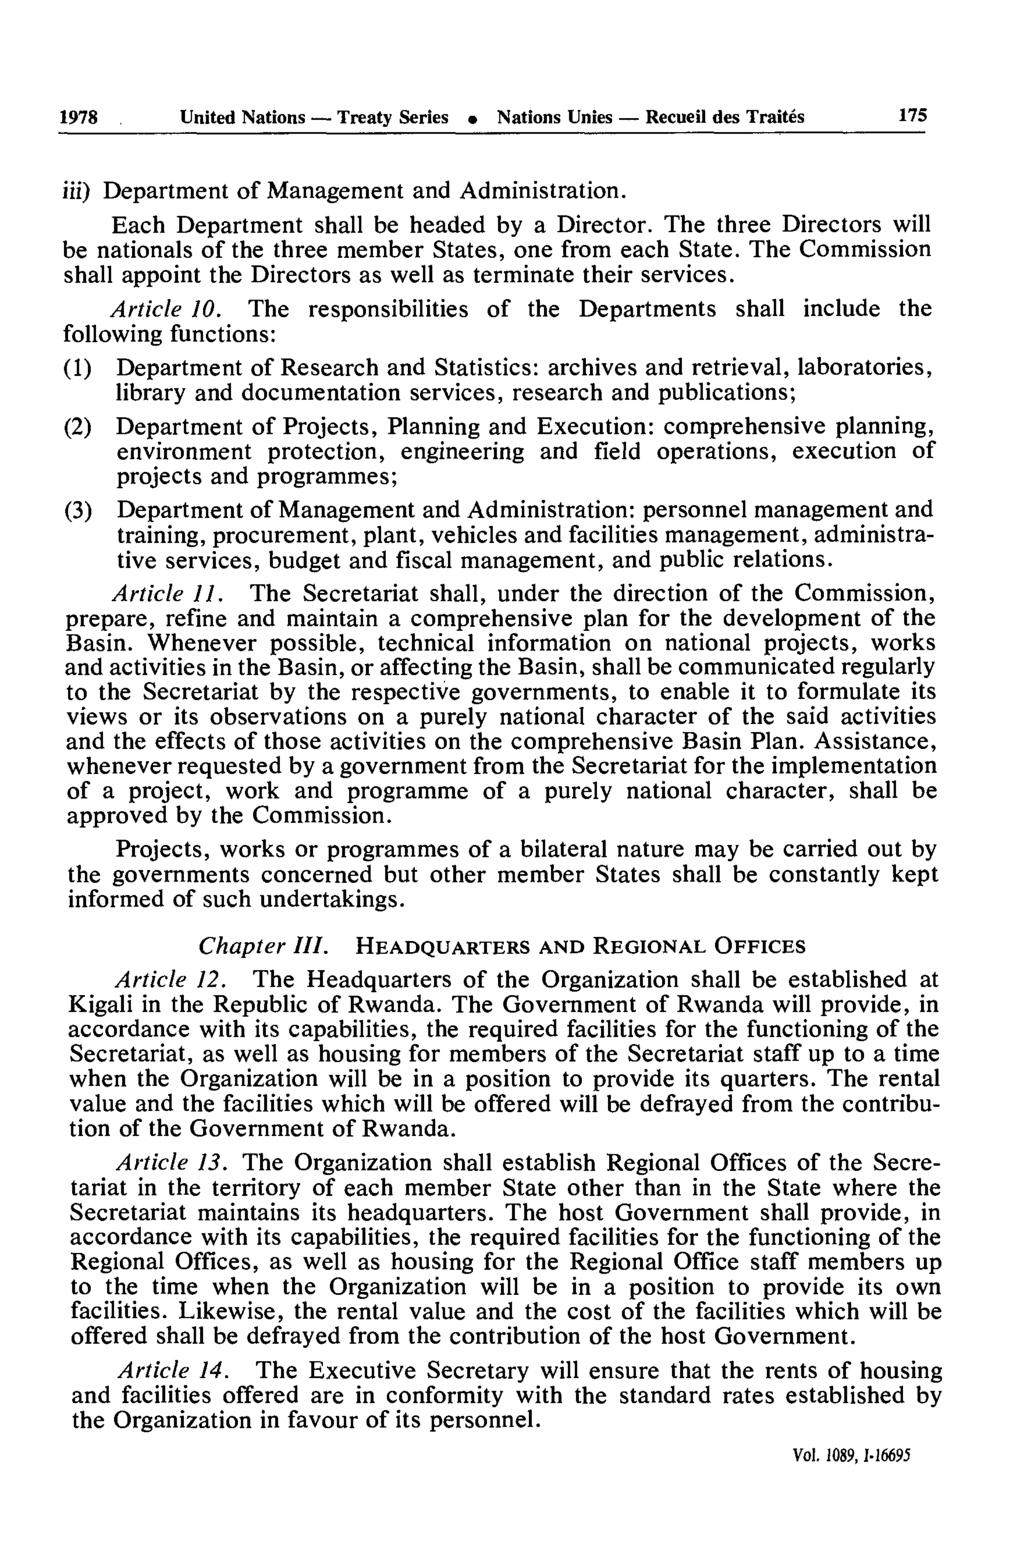 1978 United Nations Treaty Series Nations Unies Recueil des Traités 175 iii) Department of Management and Administration. Each Department shall be headed by a Director.